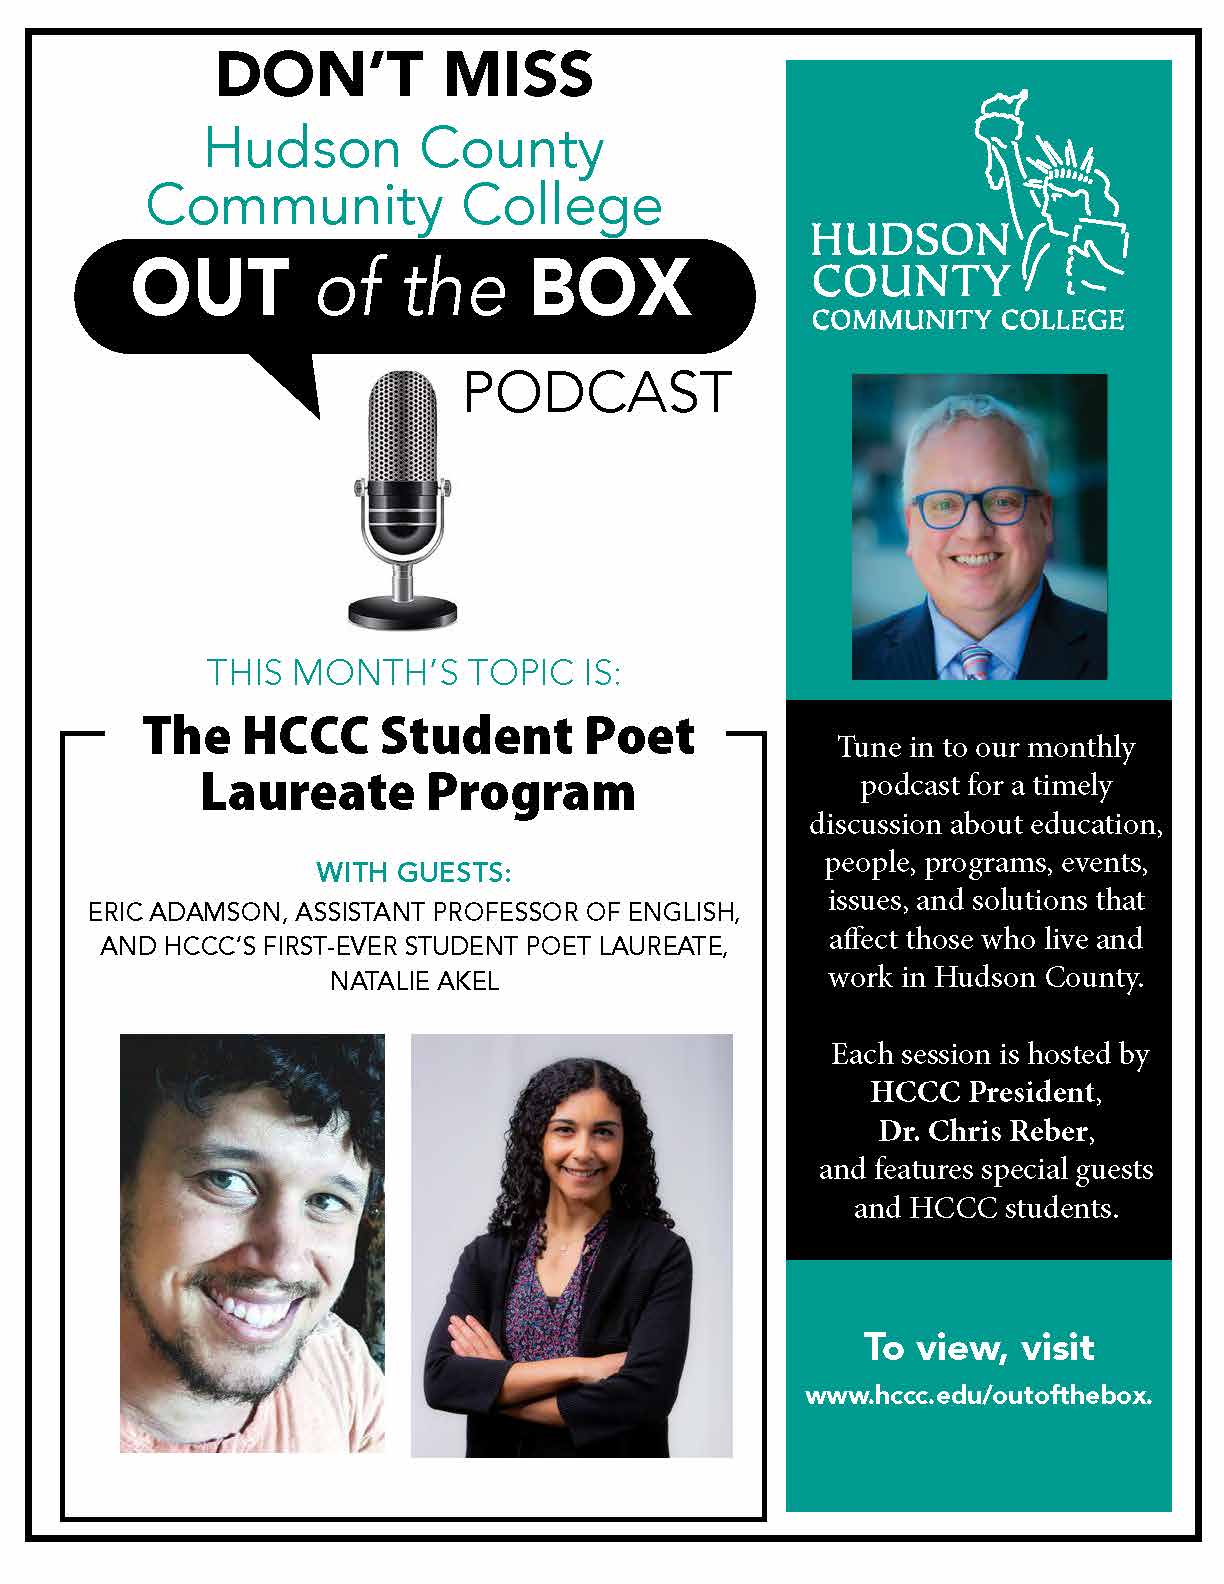 Out of the Box - Student Poet Laureate Program